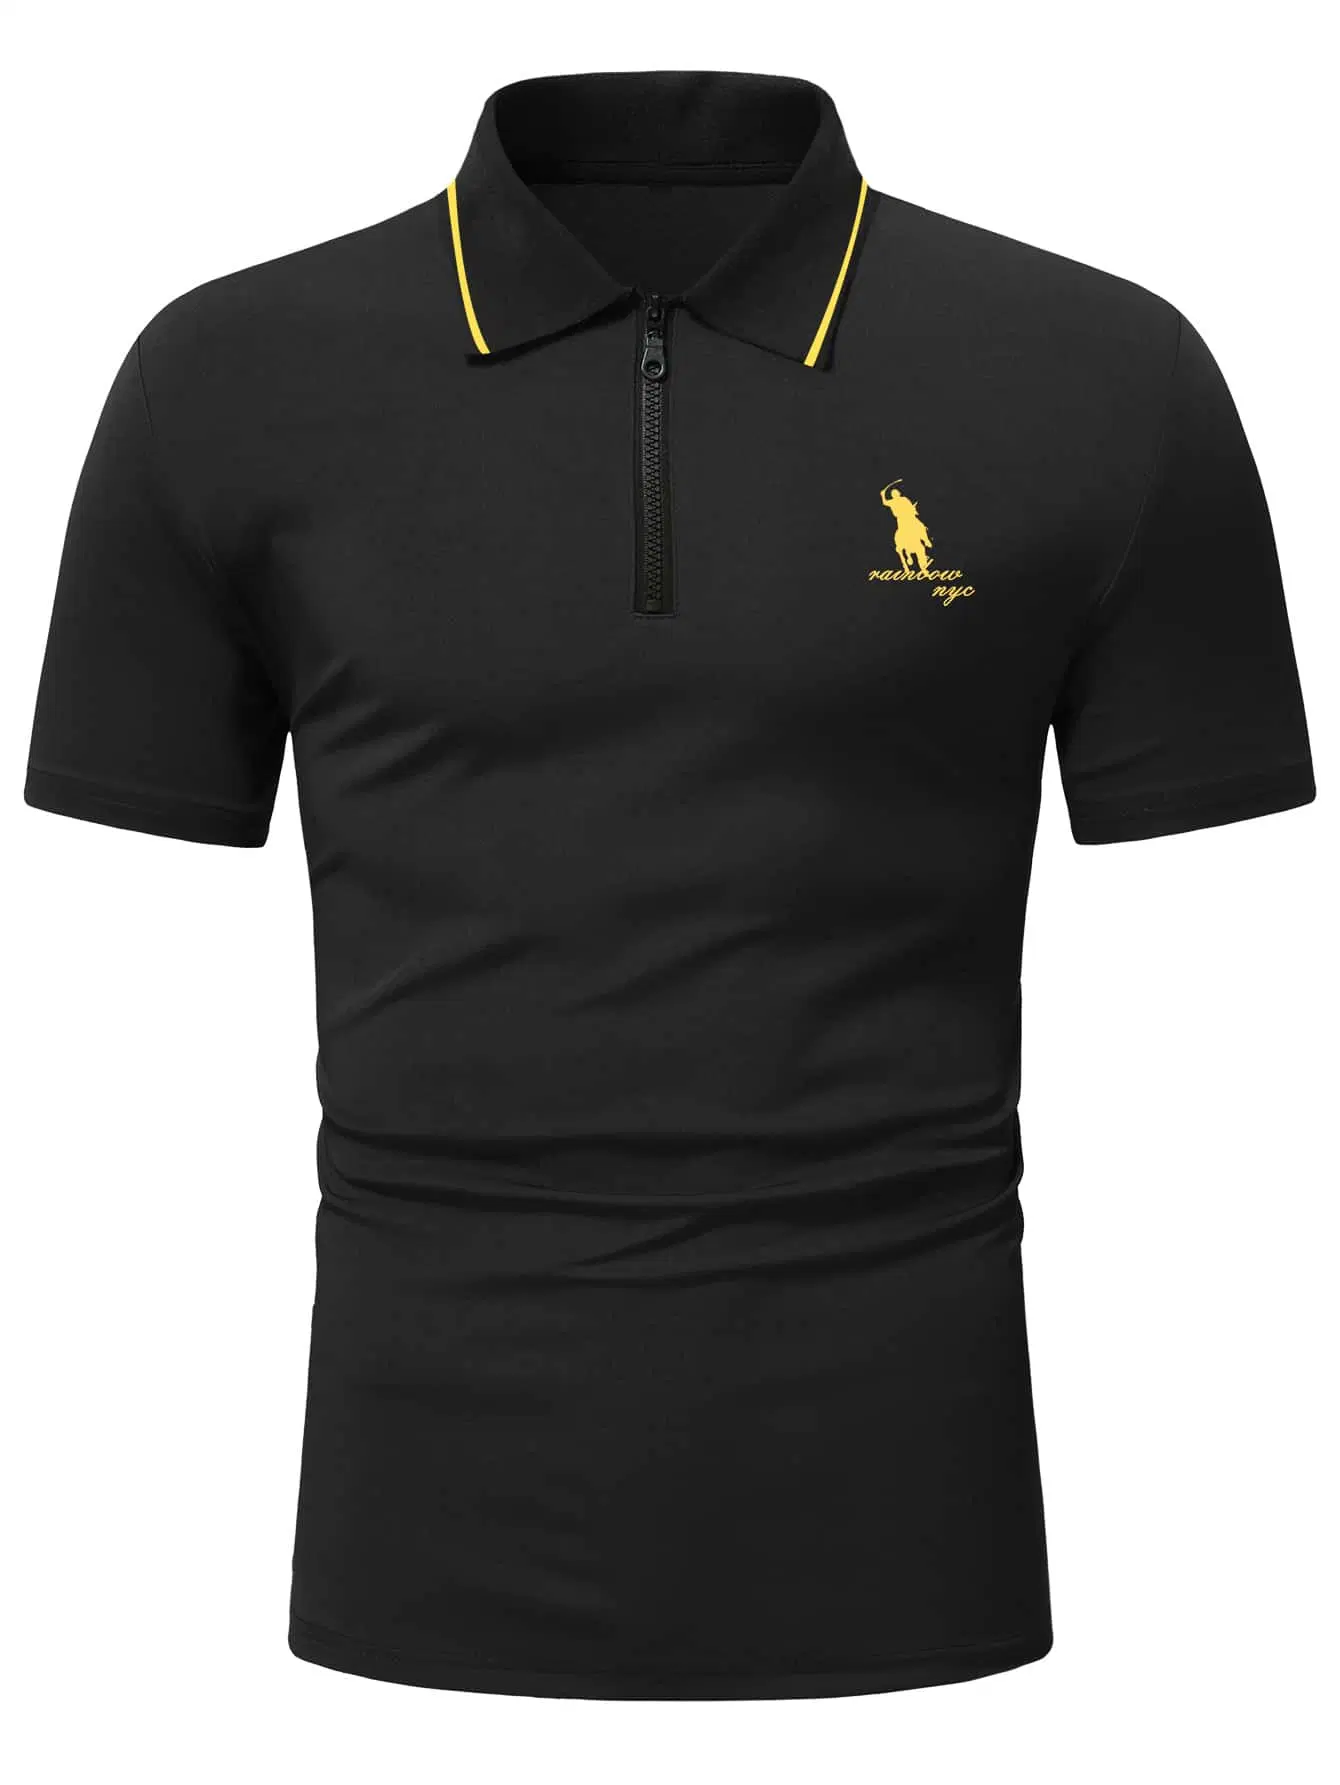 Polo Neck with Zip Tshirts 100% Cotton Embroidered Men's Shirt Custom Golf Polo Shirts Custom Logo Polos T Shirts for Men